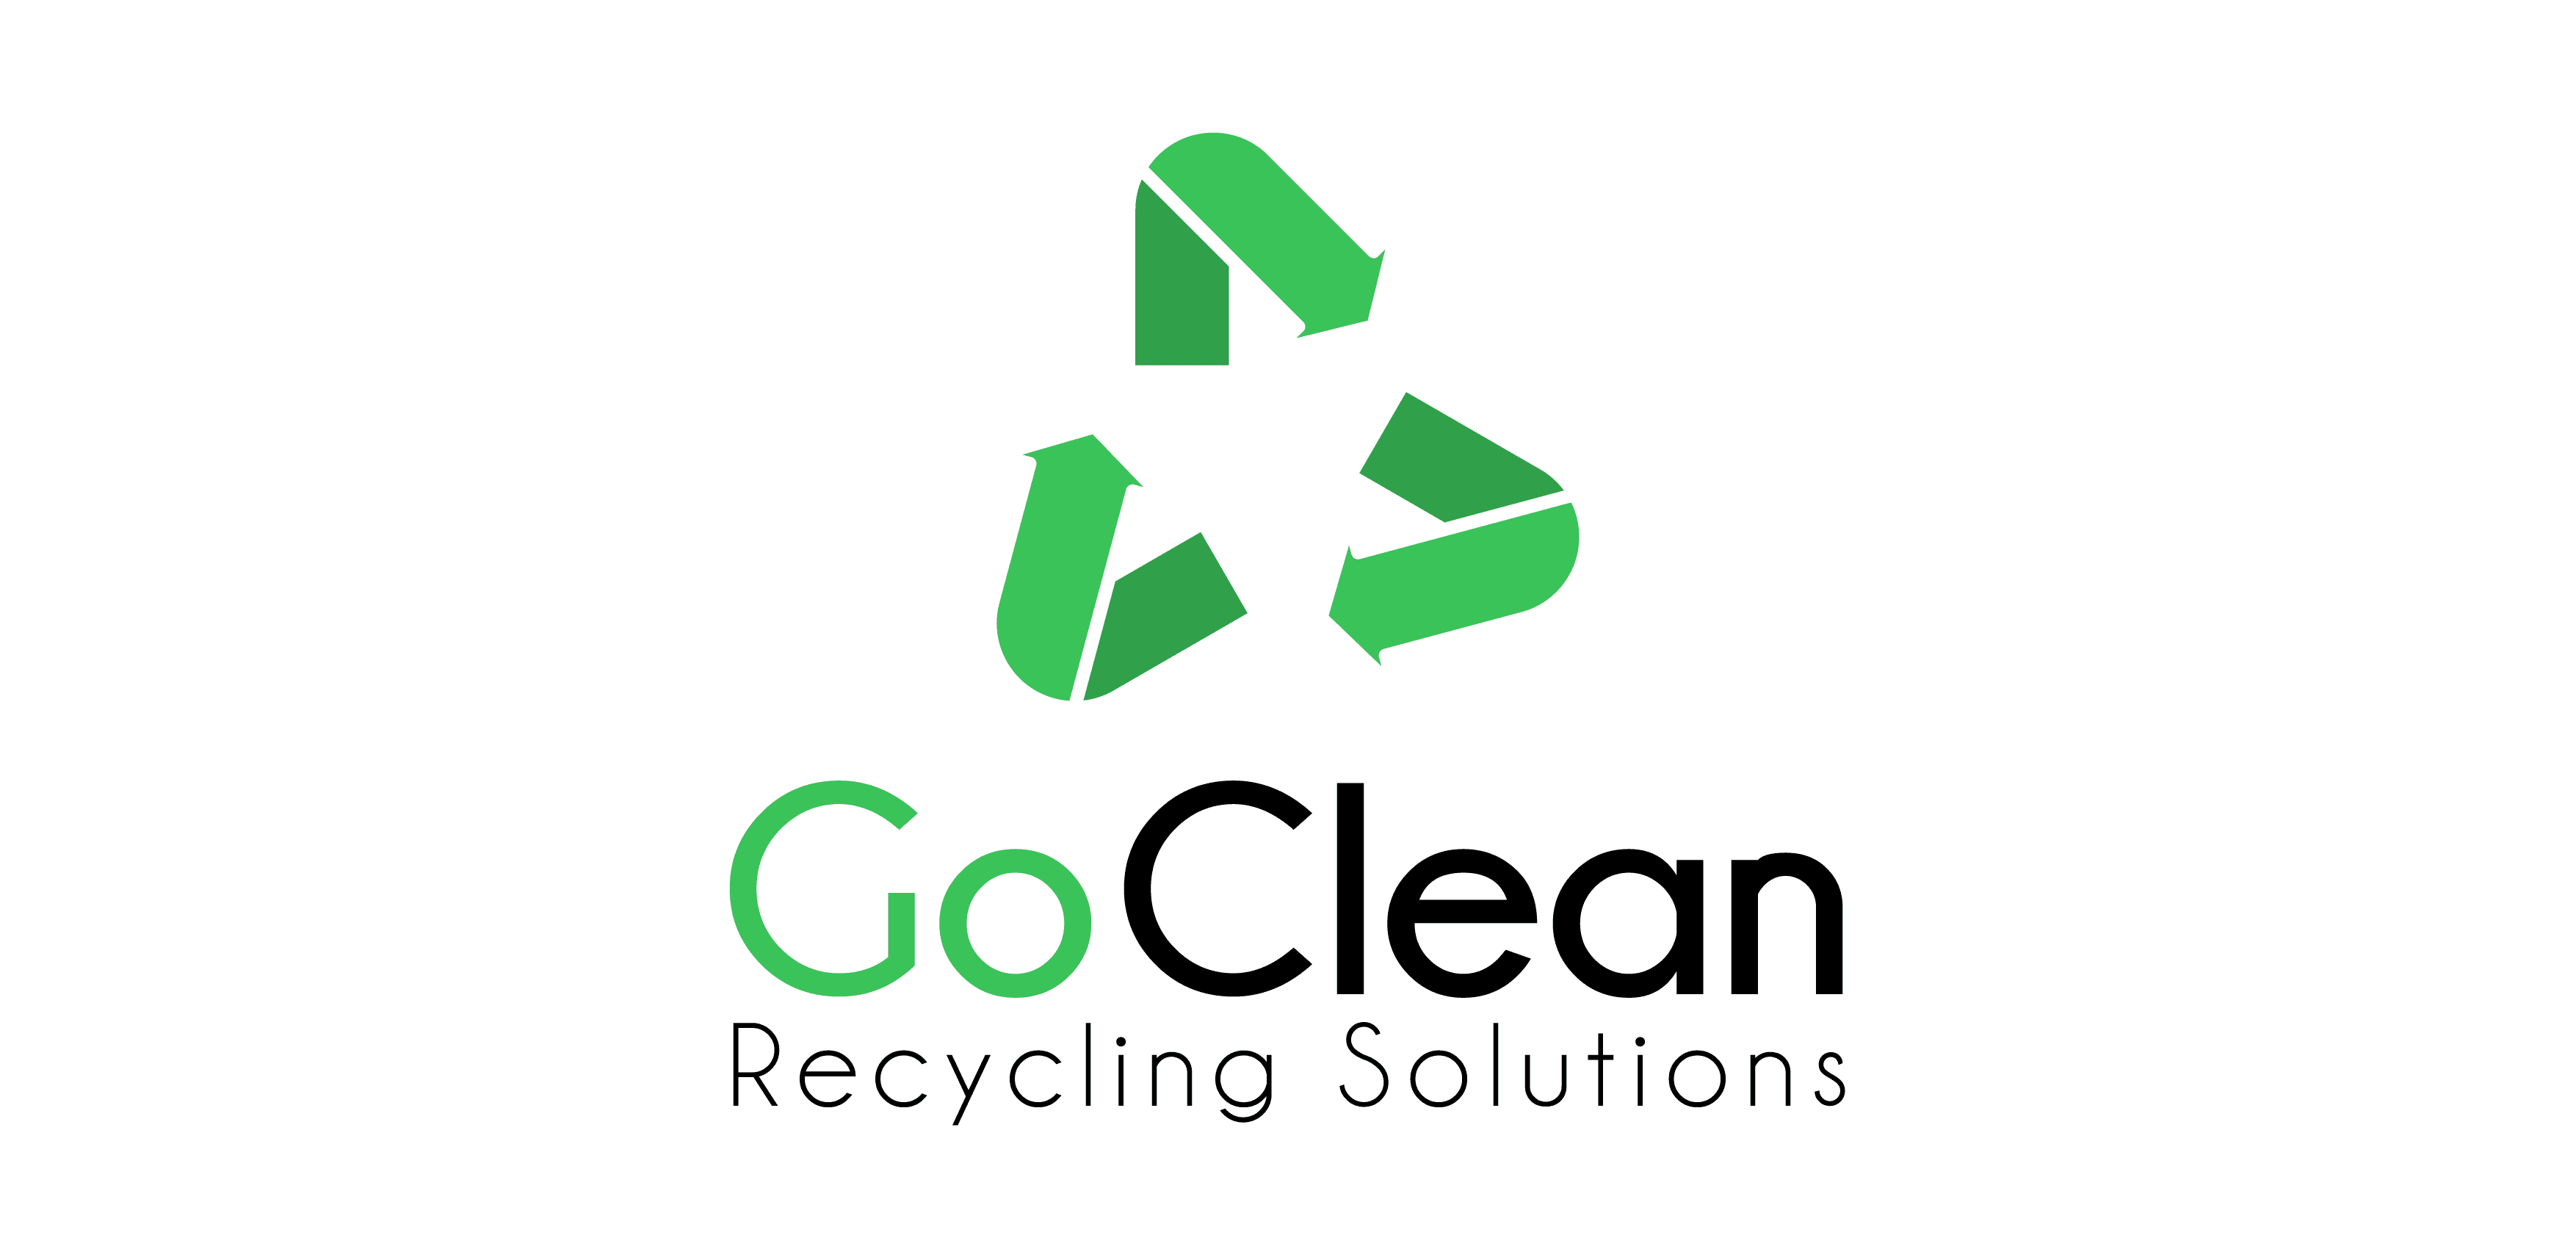  Go Clean - مصر